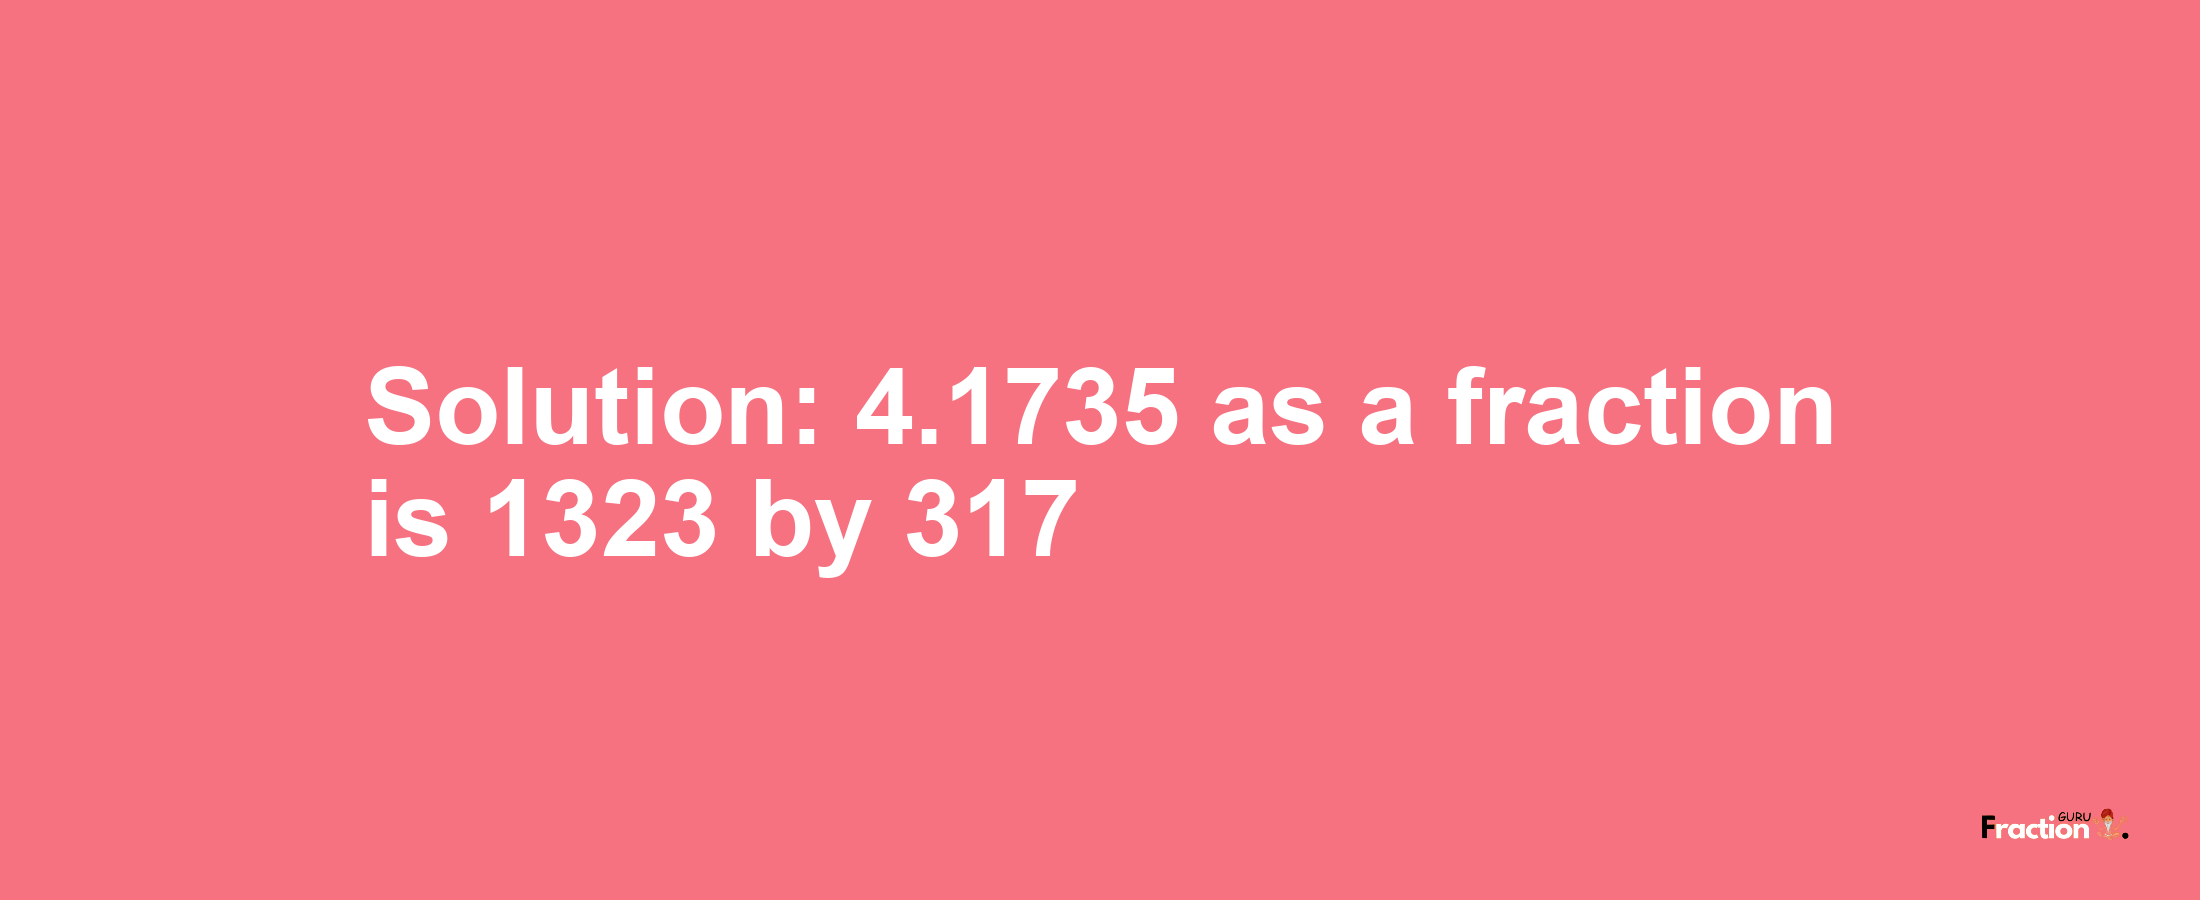 Solution:4.1735 as a fraction is 1323/317